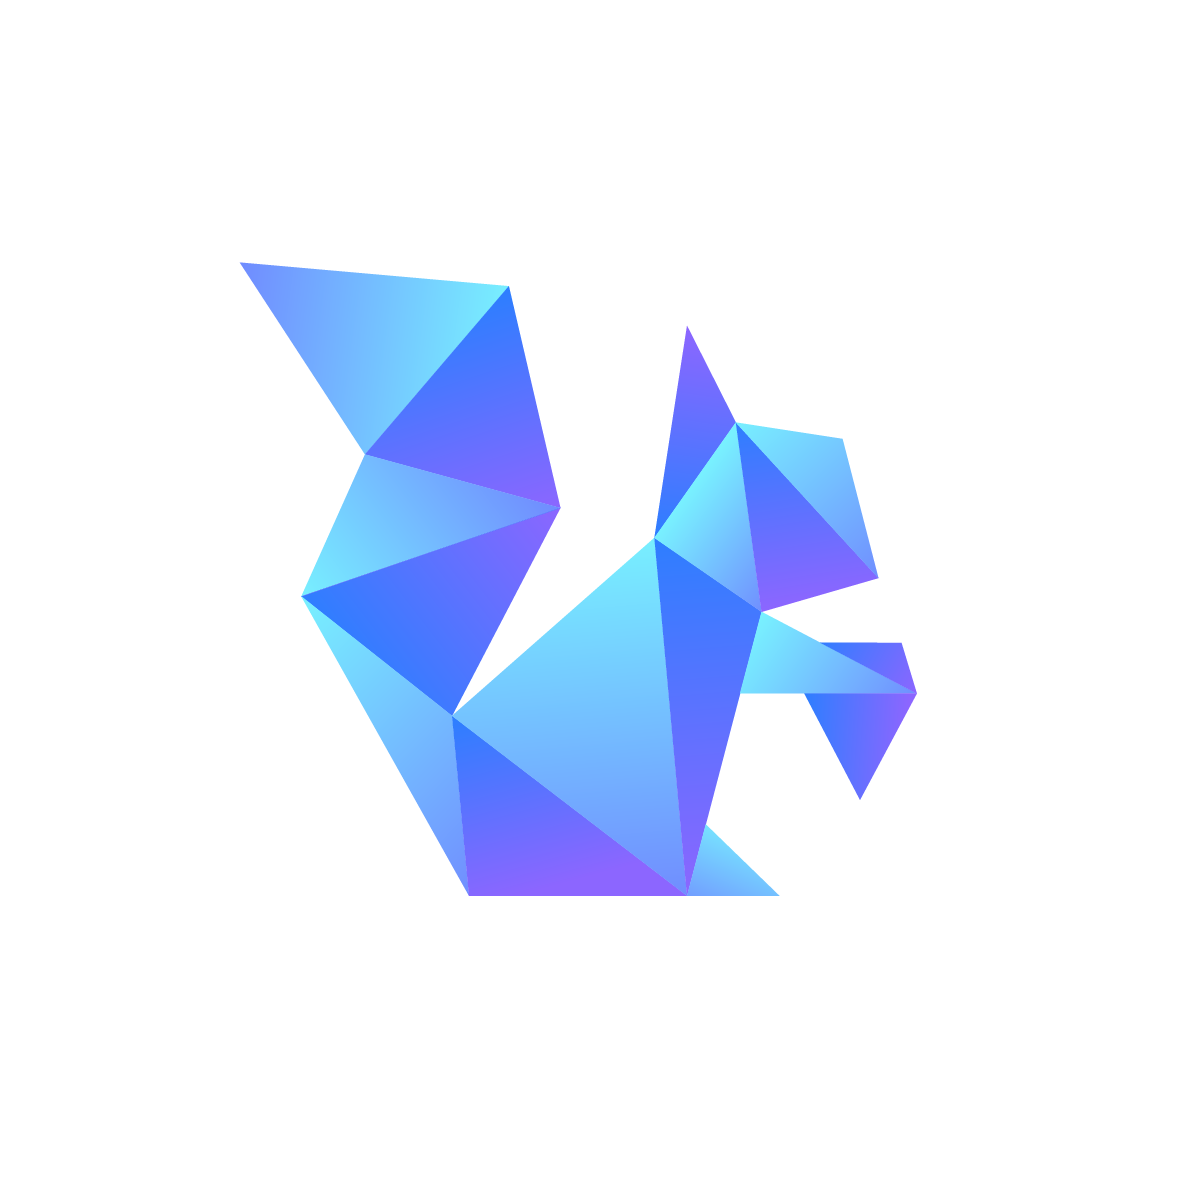 Low Poly Squirrel Logo showcases a geometric squirrel silhouette formed by triangles, symbolizing tech innovation and blockchain focus